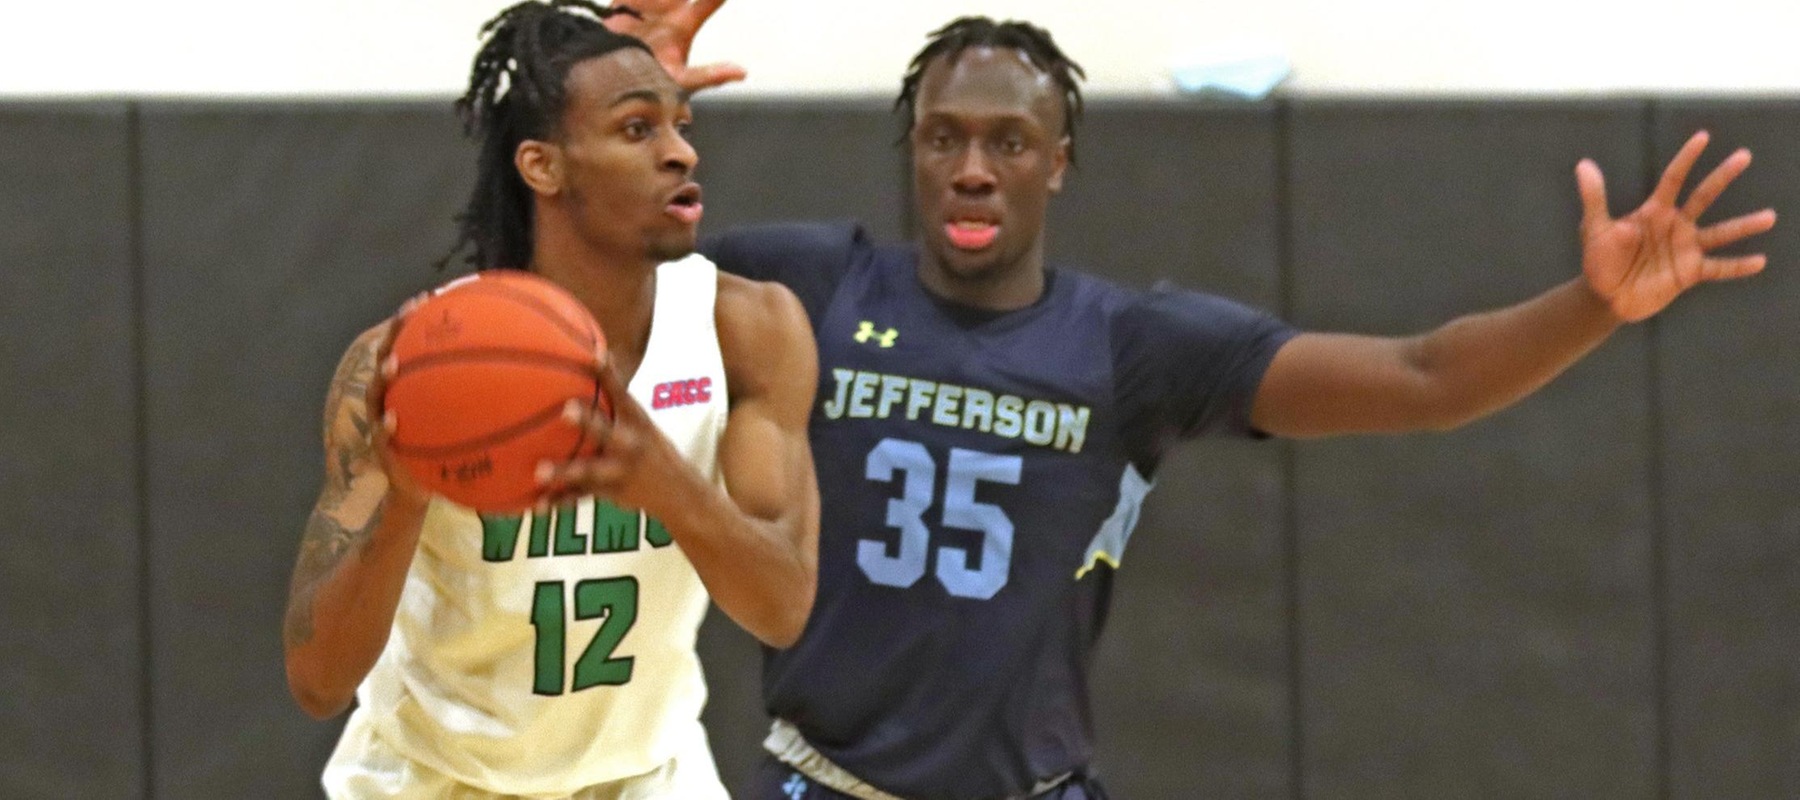 Photo of Justin Thomas who scored 23 points while adding five rebounds and five assists against Jefferson. Copyright 2022; Wilmington University. All rights reserved. Photo by Trudy Spence. January 26, 2022 vs. Jefferson.